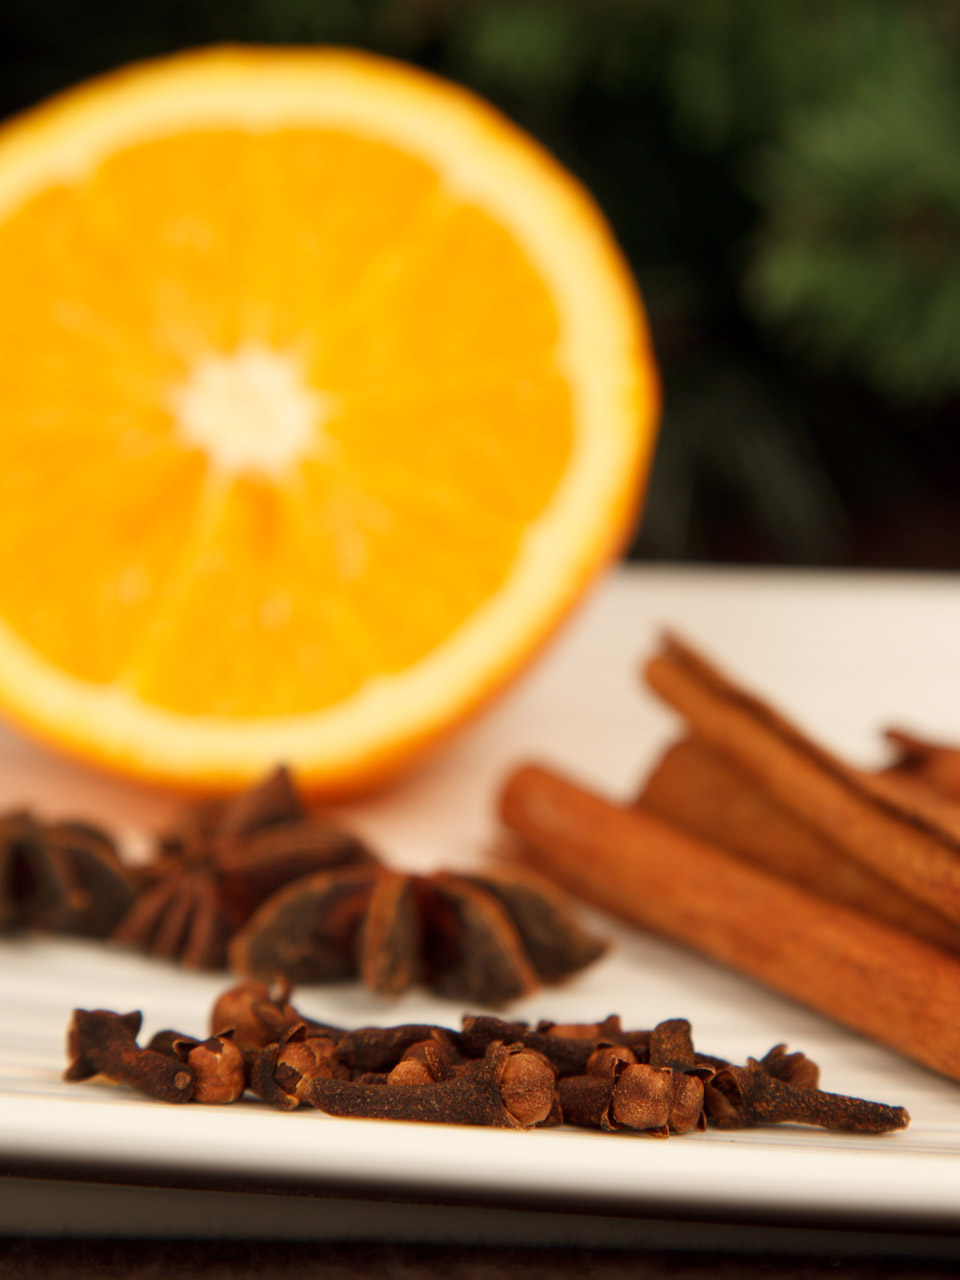 cloves on the plate with cinammon and orange blurred on the background